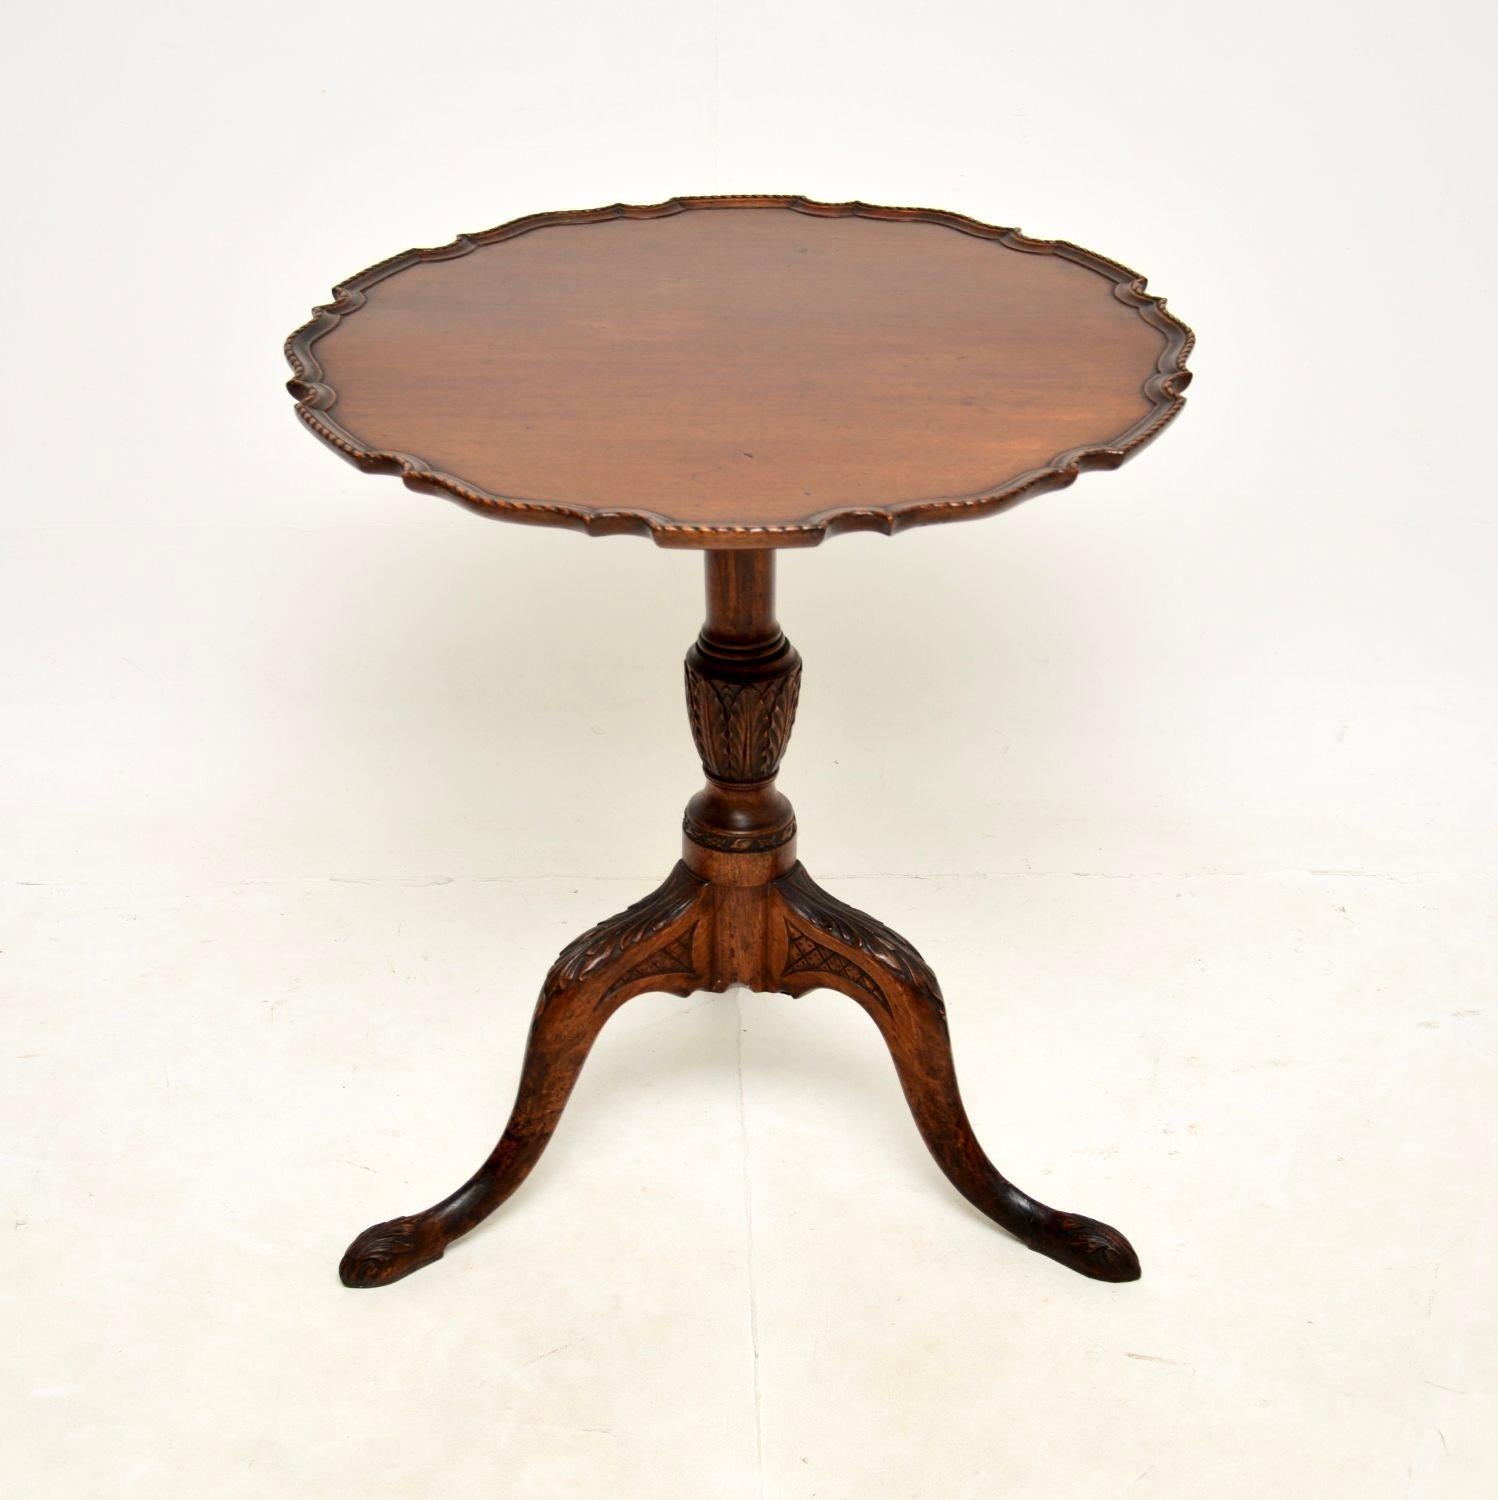 A beautiful original antique Georgian snap top occasional table. This was made in England, it dates from around the 1790’s period.

It is of extremely fine quality, the top has a raised pie crust edge and can flip up / lock in place with the